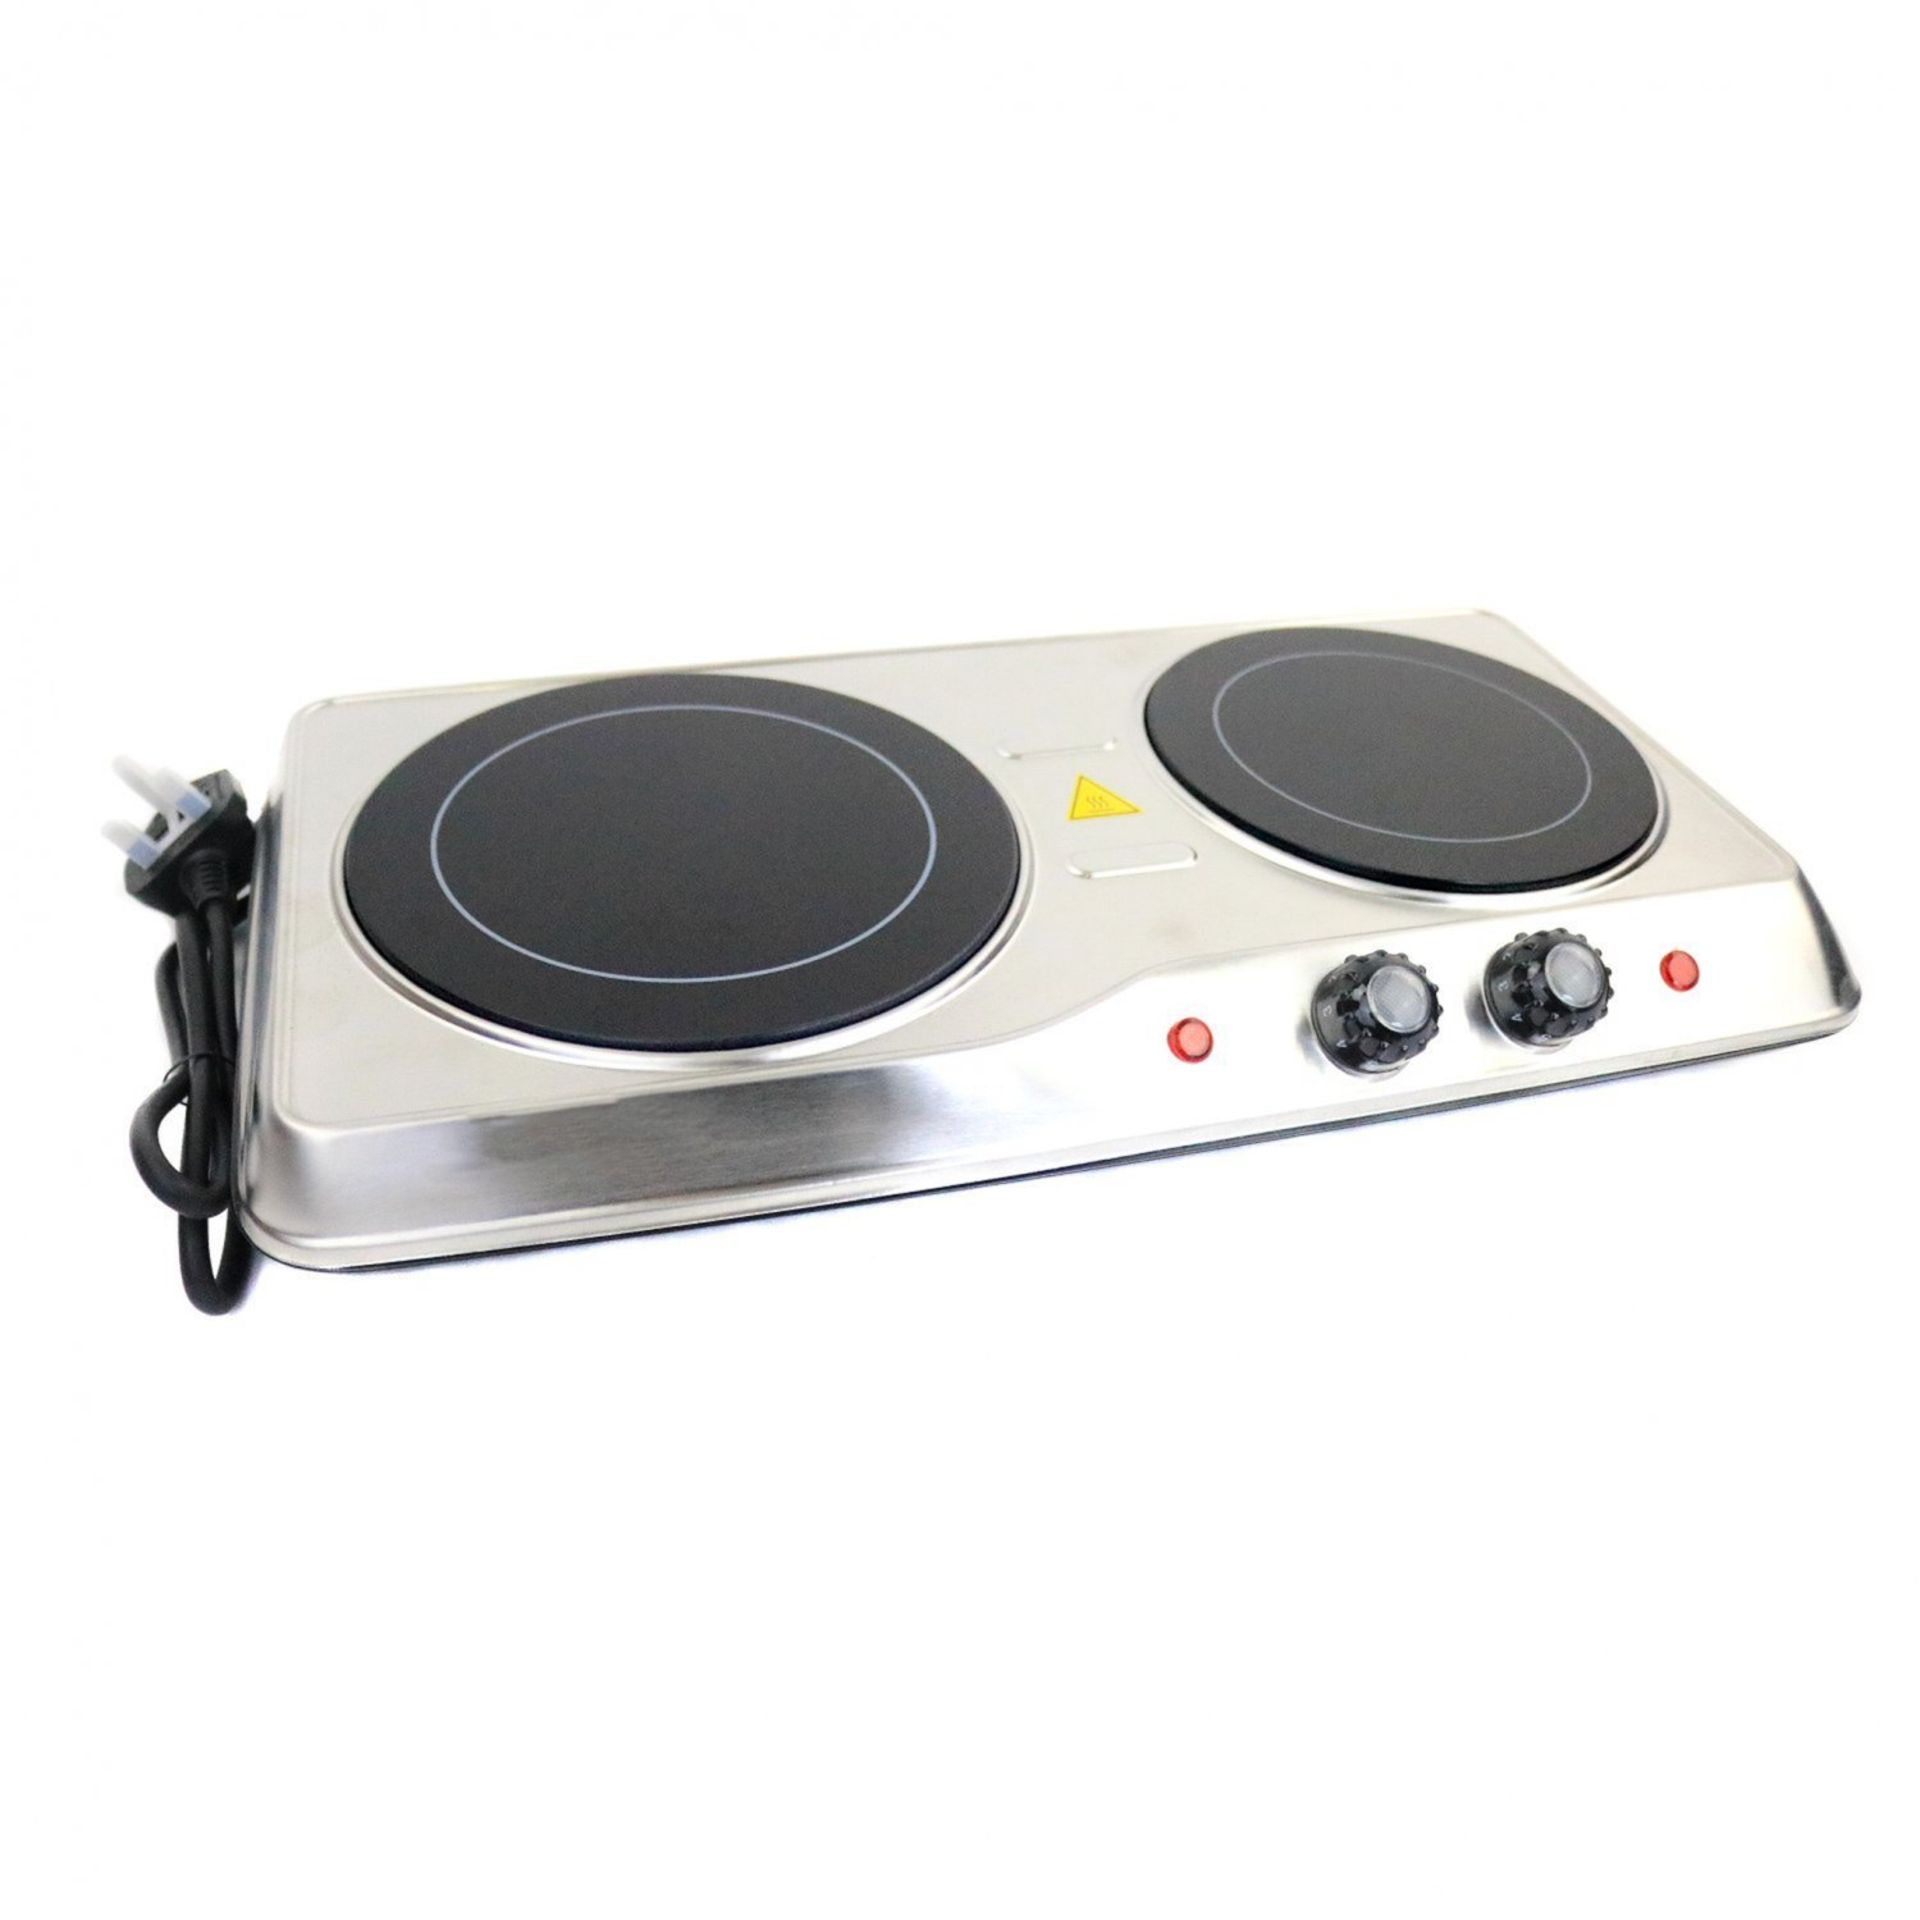 (PR35) 2000W Ceramic Portable Infrared Electric Double Hot Plate Hob Total Power: 2000W - Larg... - Image 2 of 2